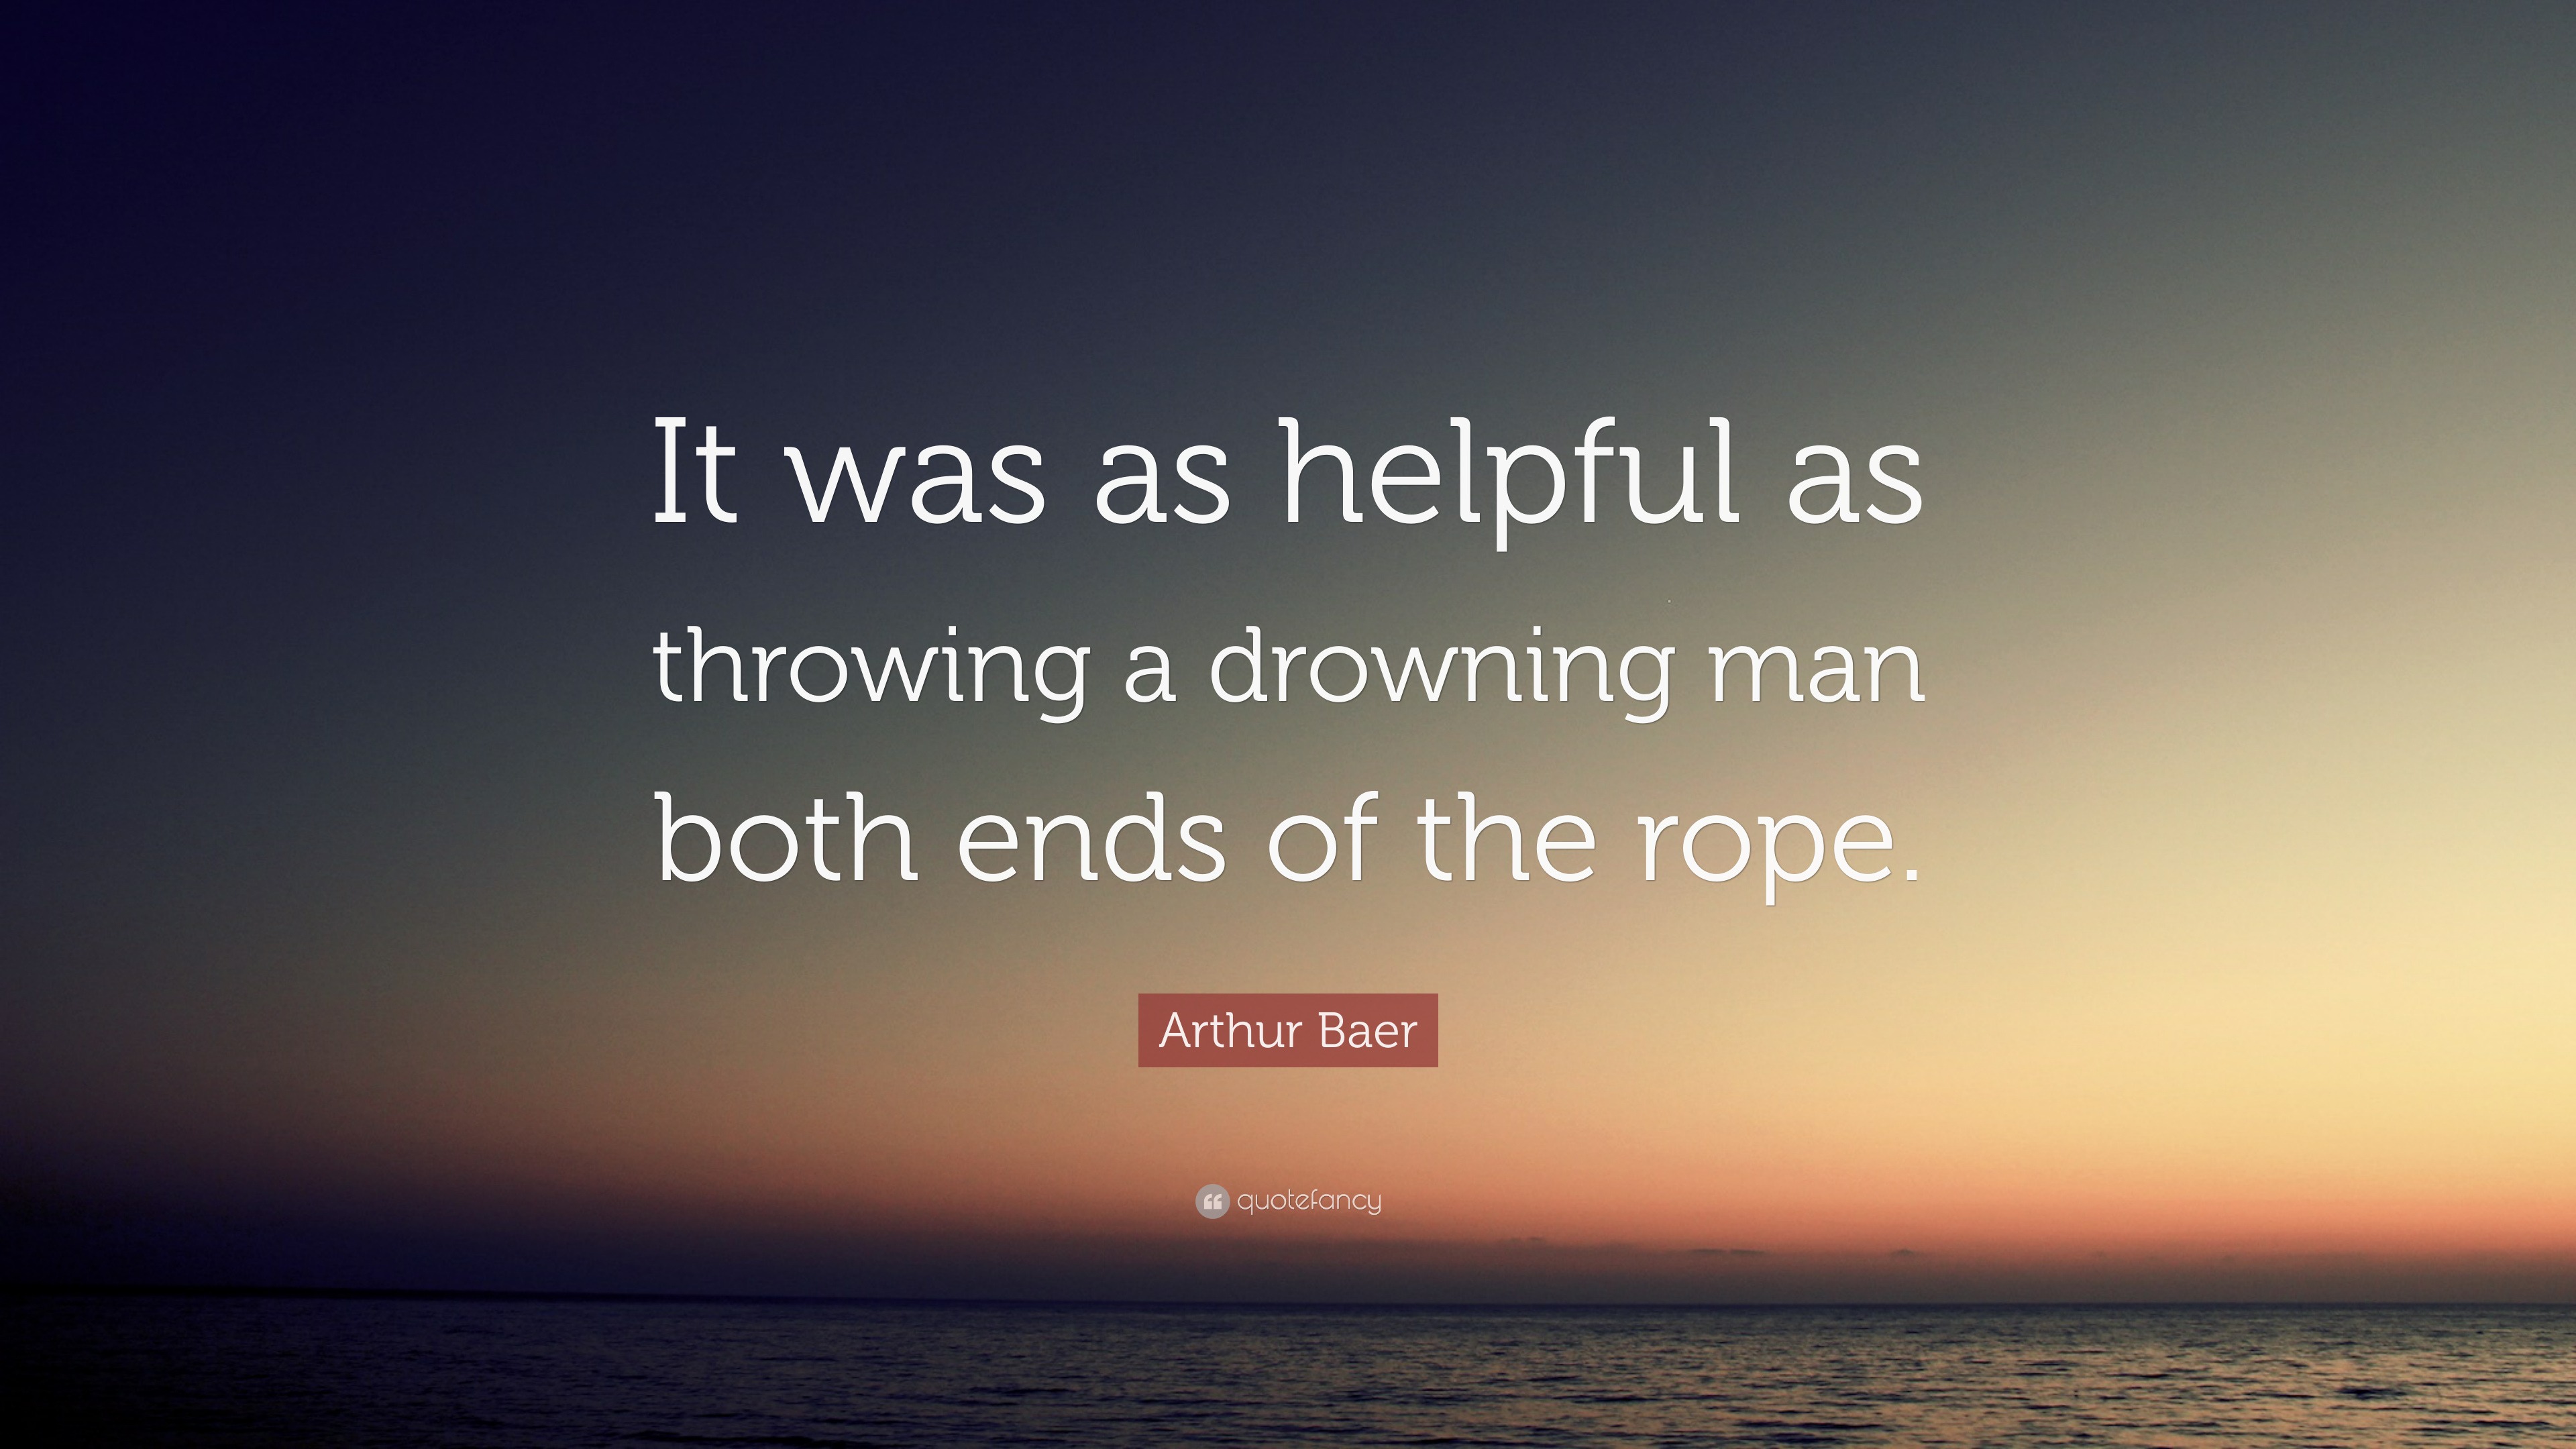 Arthur Baer Quote: “It was as helpful as throwing a drowning man